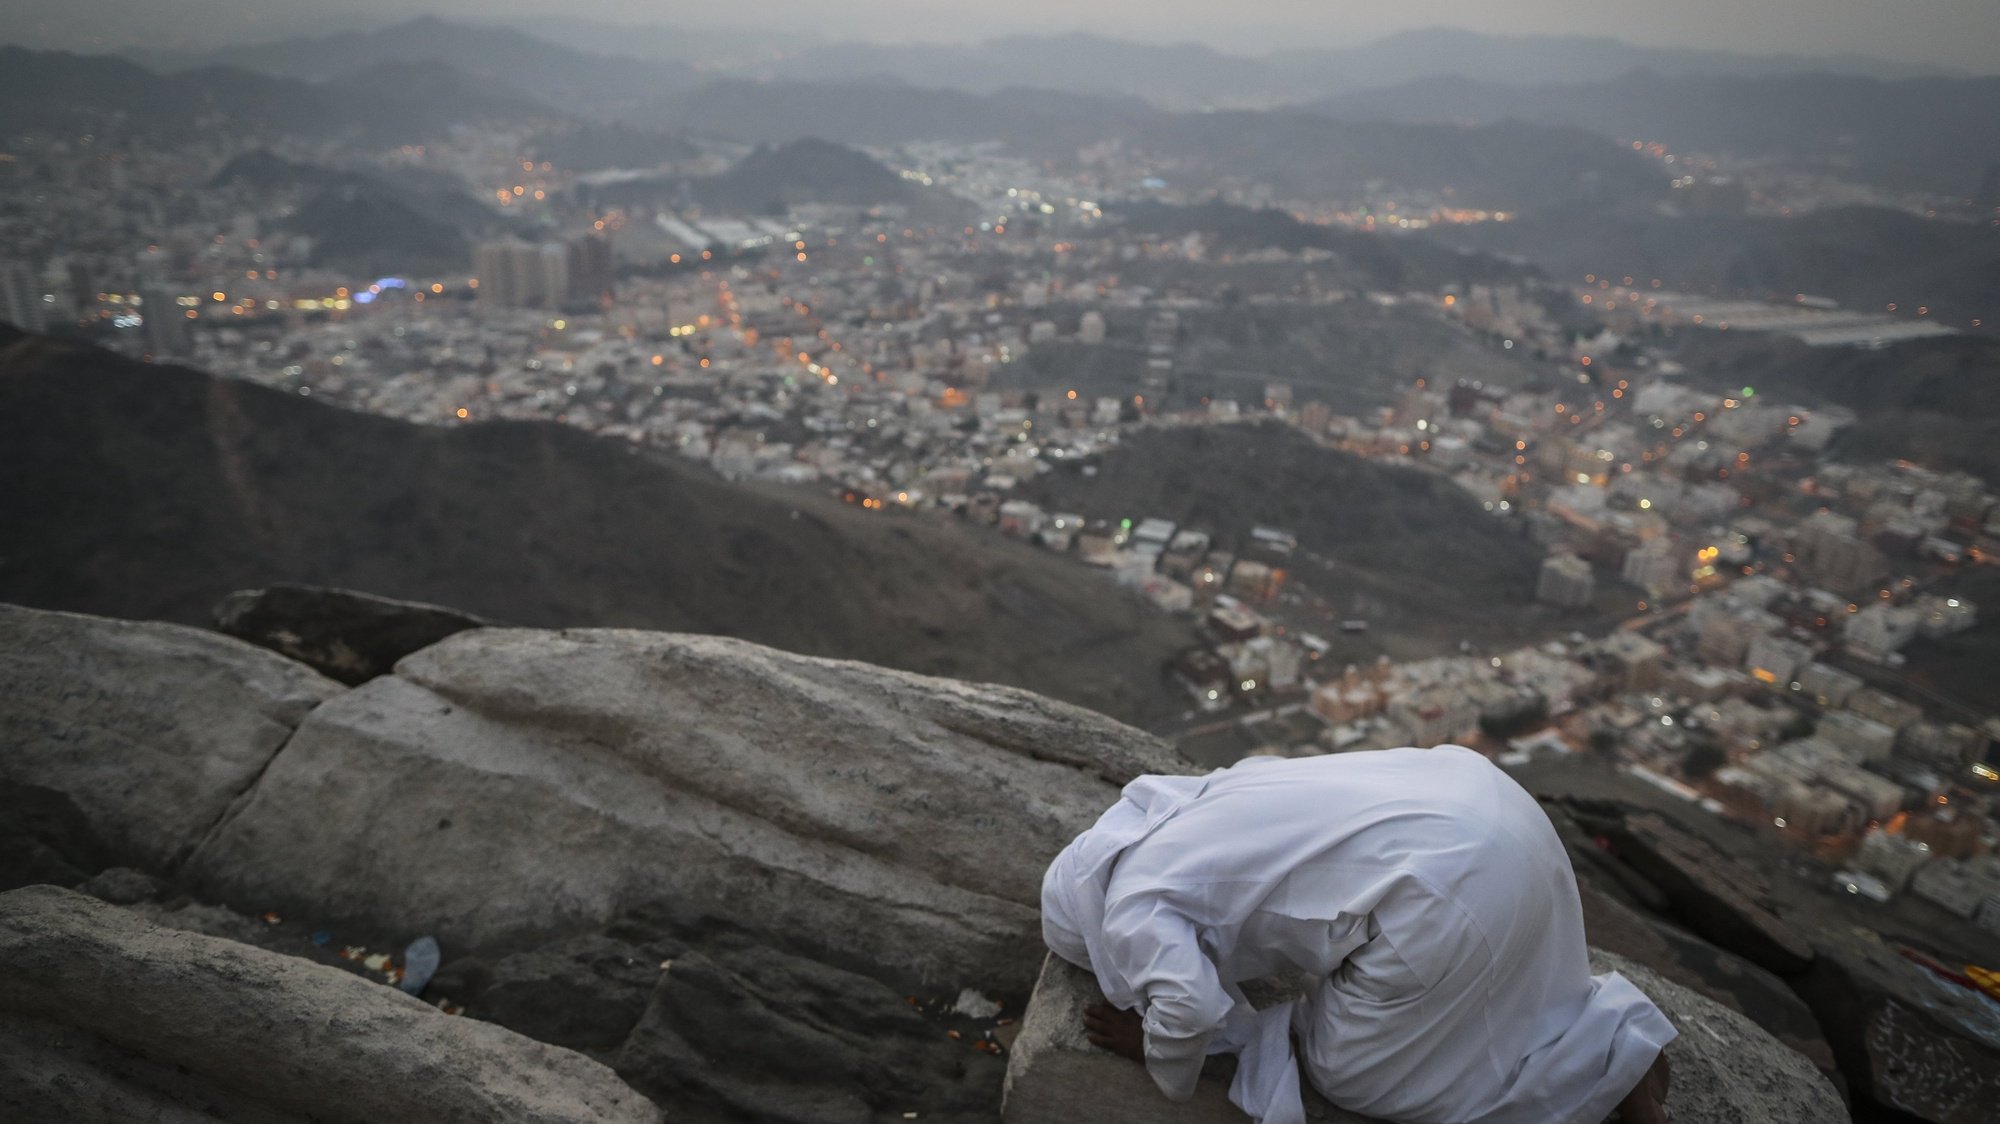 epaselect epa06169111 A Muslim worshipper prays on the top of Mount Al-Noor where the Prophet Muhammad received the first words of the Koran in Mecca, Saudi Arabia, 28 August 2017. Around 2.6 million muslims are expected to attend this year&#039;s Hajj pilgrimage, which is highlighted by the Day of Arafah, one day prior to Eid al-Adha. Eid al-Adha is the holiest of the two Muslims holidays celebrated each year, it marks the yearly Muslim pilgrimage (Hajj) to visit Mecca, the holiest place in Islam. Muslims slaughter a sacrificial animal and split the meat into three parts, one for the family, one for friends and relatives, and one for the poor and needy.  EPA/MAST IRHAM